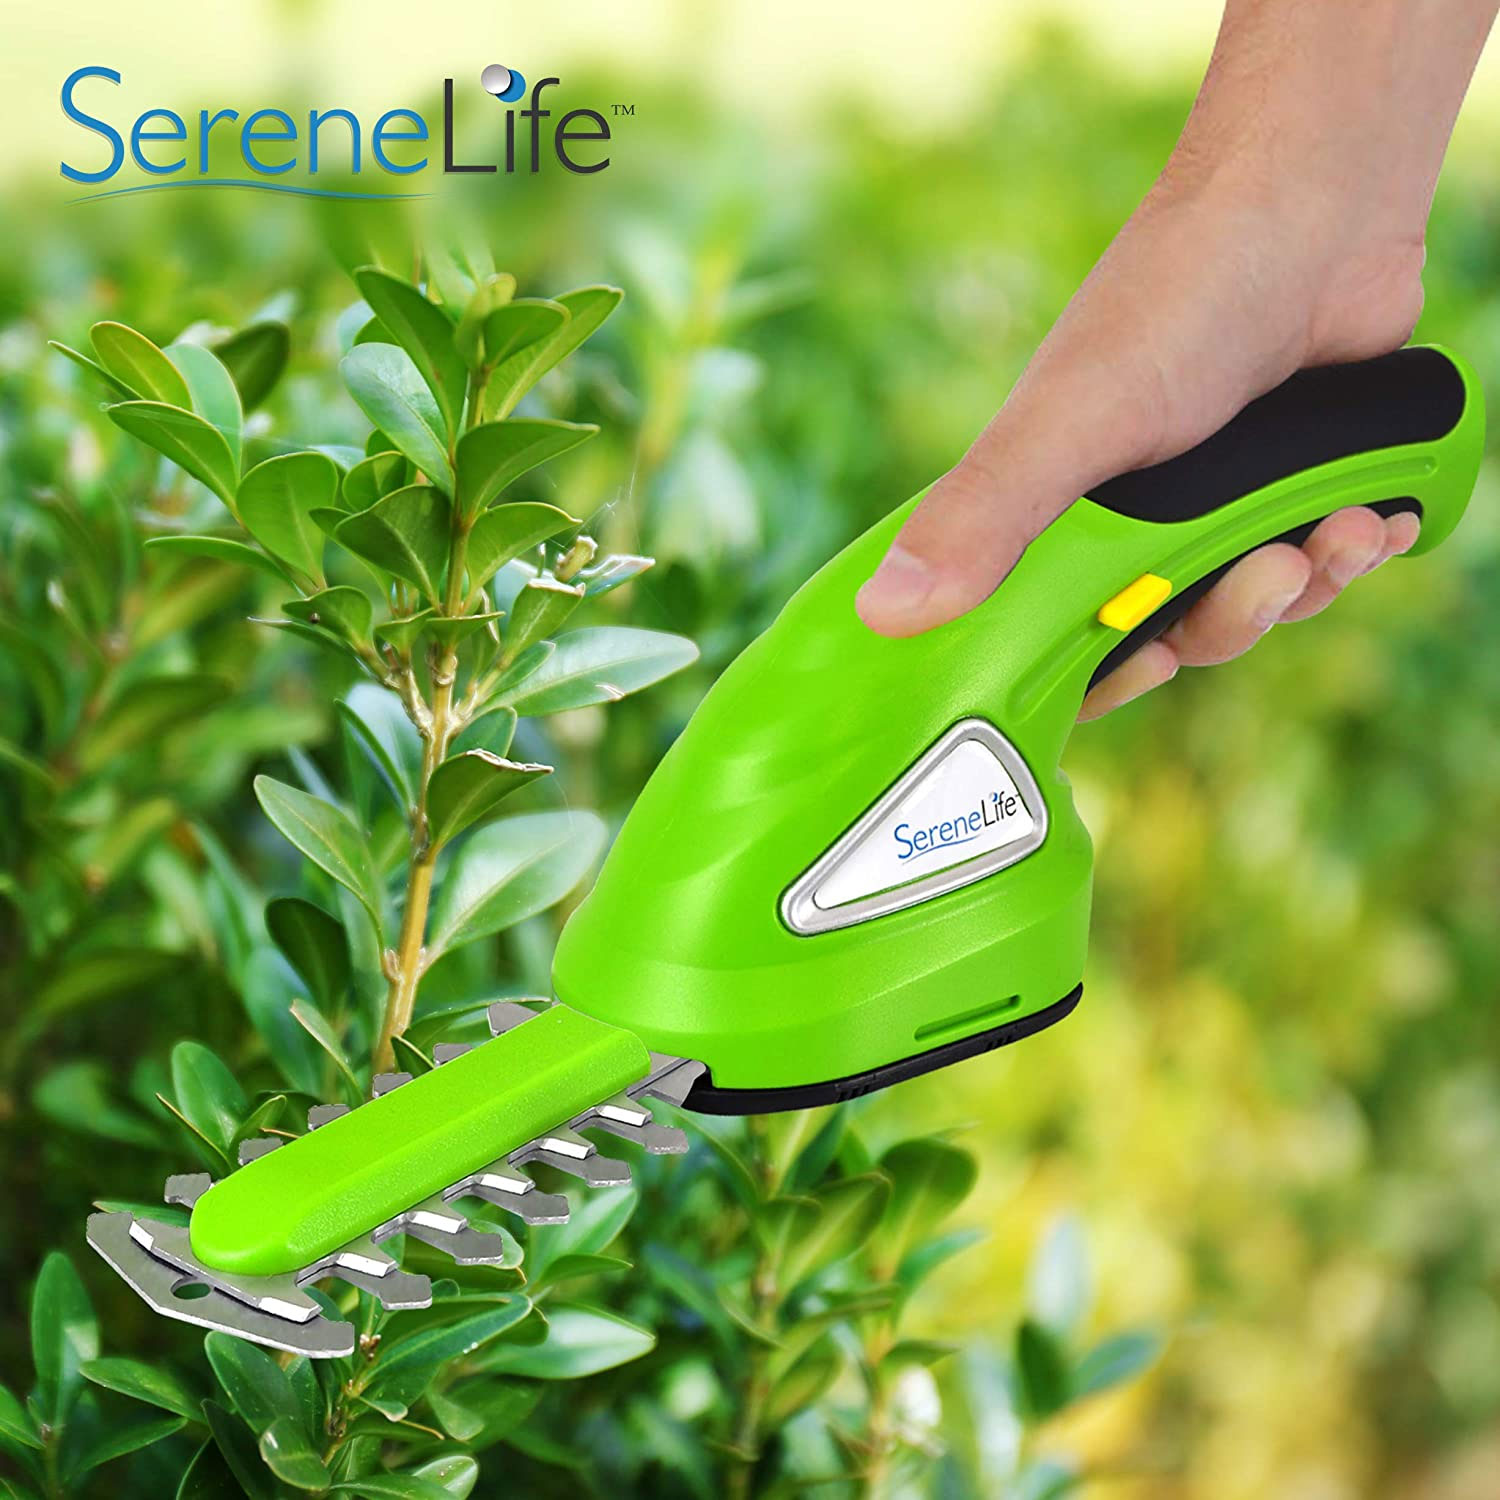 Serenelife Rechargeable Electric Handheld Cordless Grass Clipper And Hedge Trimmer 68888764438 Ebay